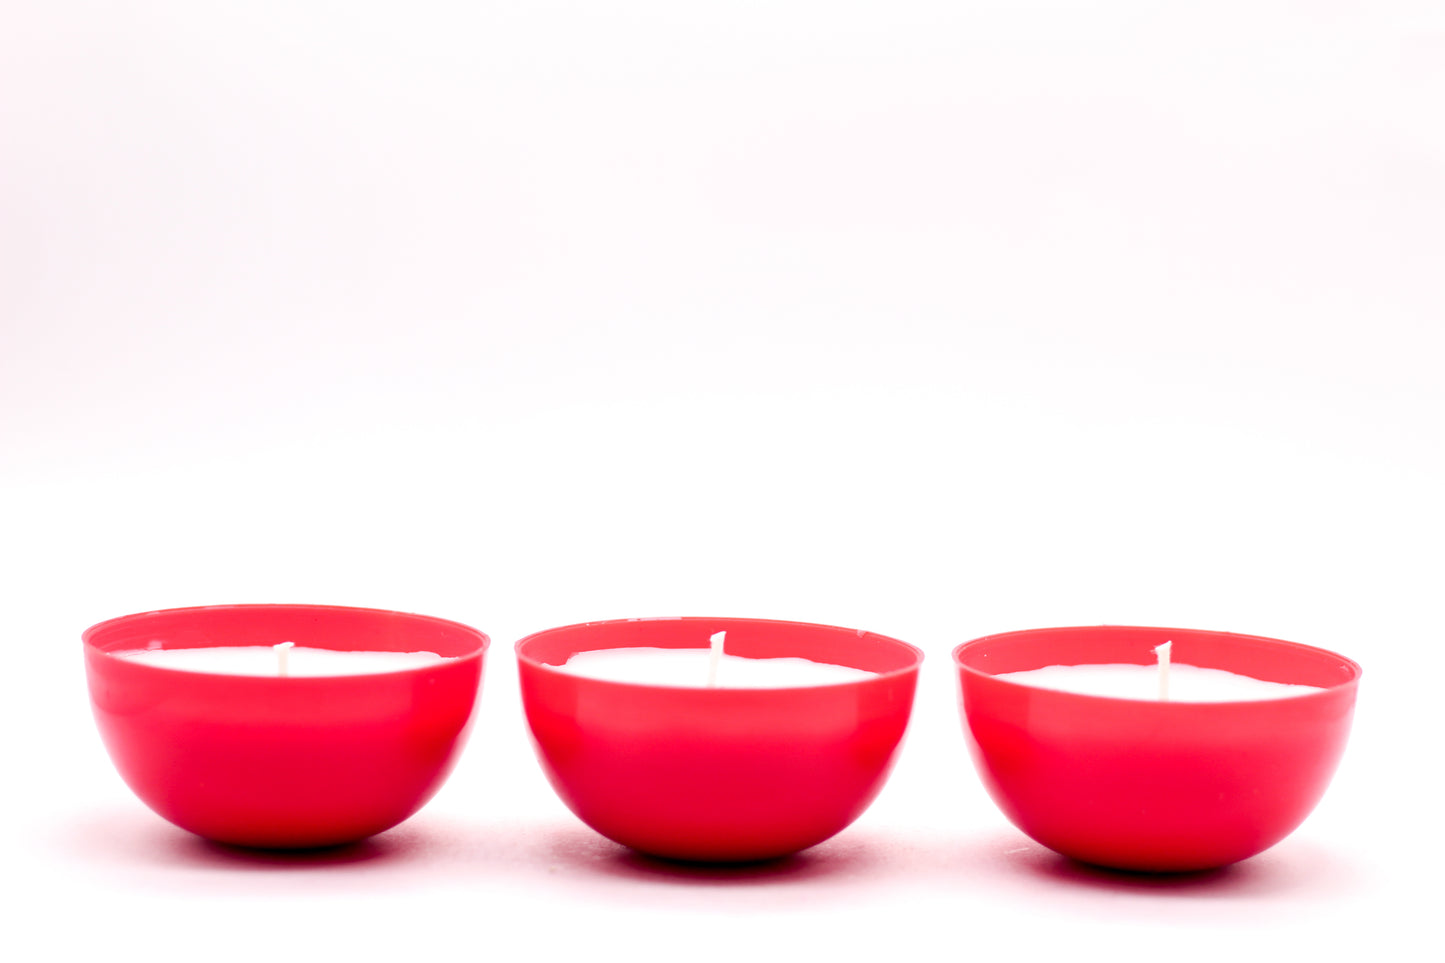 AuraDecor Empty Red Cups For Candle Making & Devotional Purpose ( Especially for Diwali & Other Auspicious Celebrations )